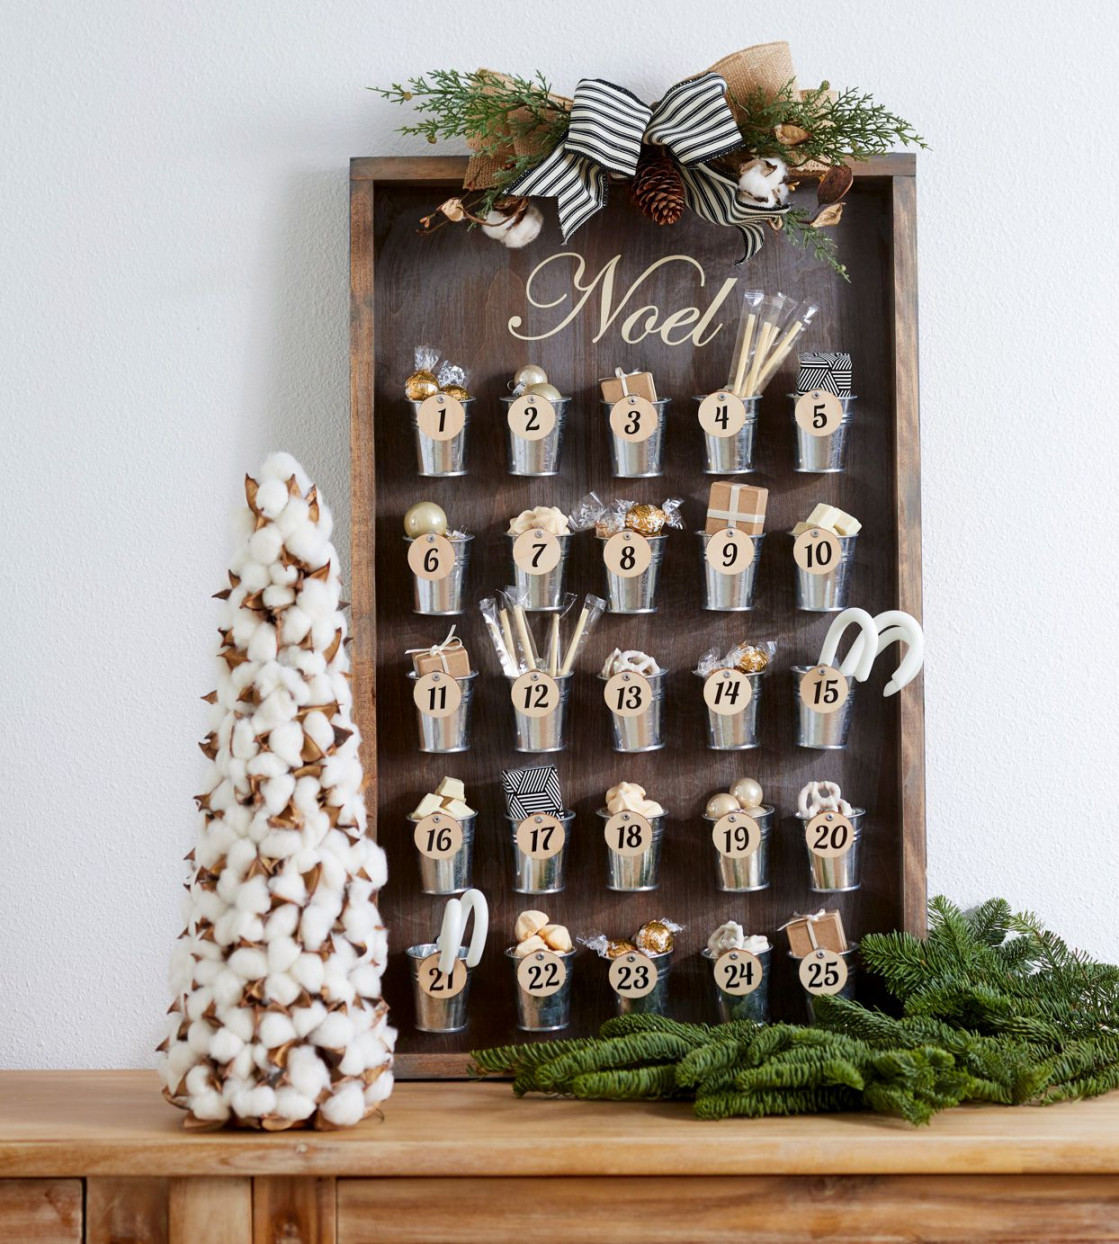 DIY Advent Calendars to Count Down to Christmas